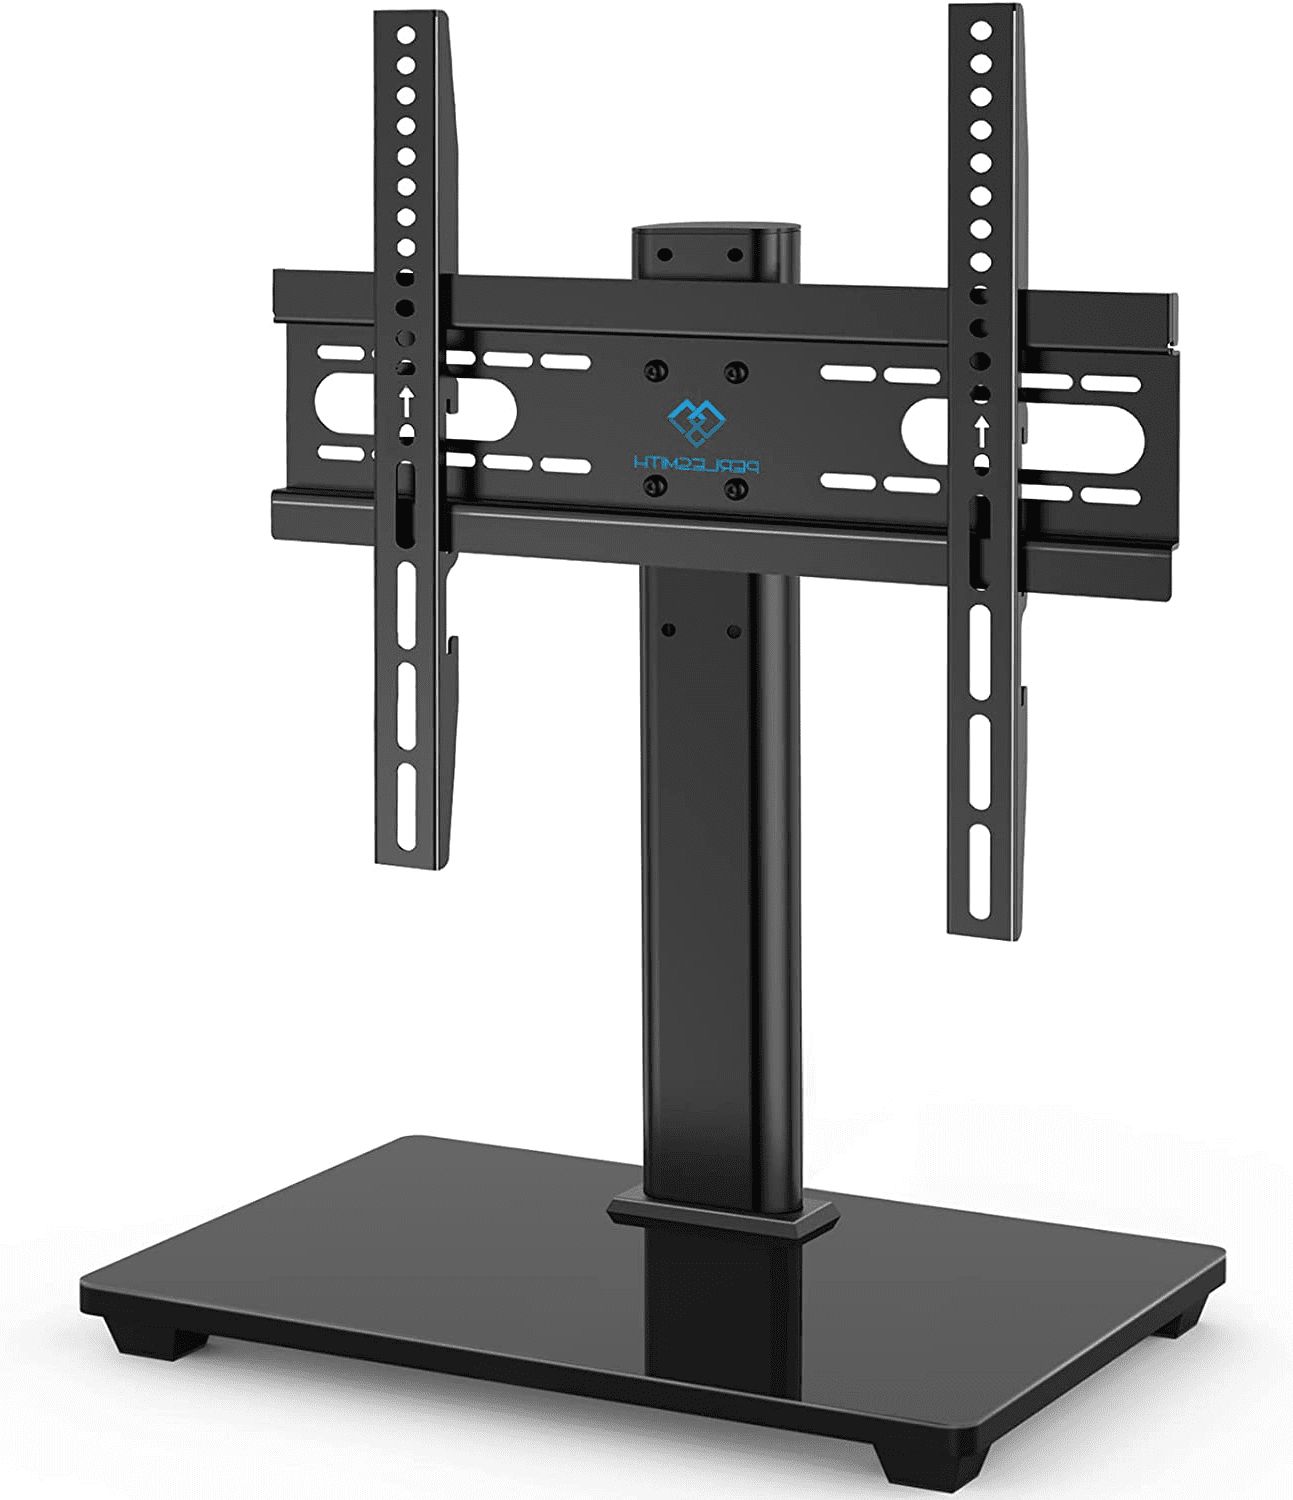 Universal Tabletop Tv Stand Base With Mount,for India | Ubuy Regarding Universal Tabletop Tv Stands (Gallery 6 of 20)